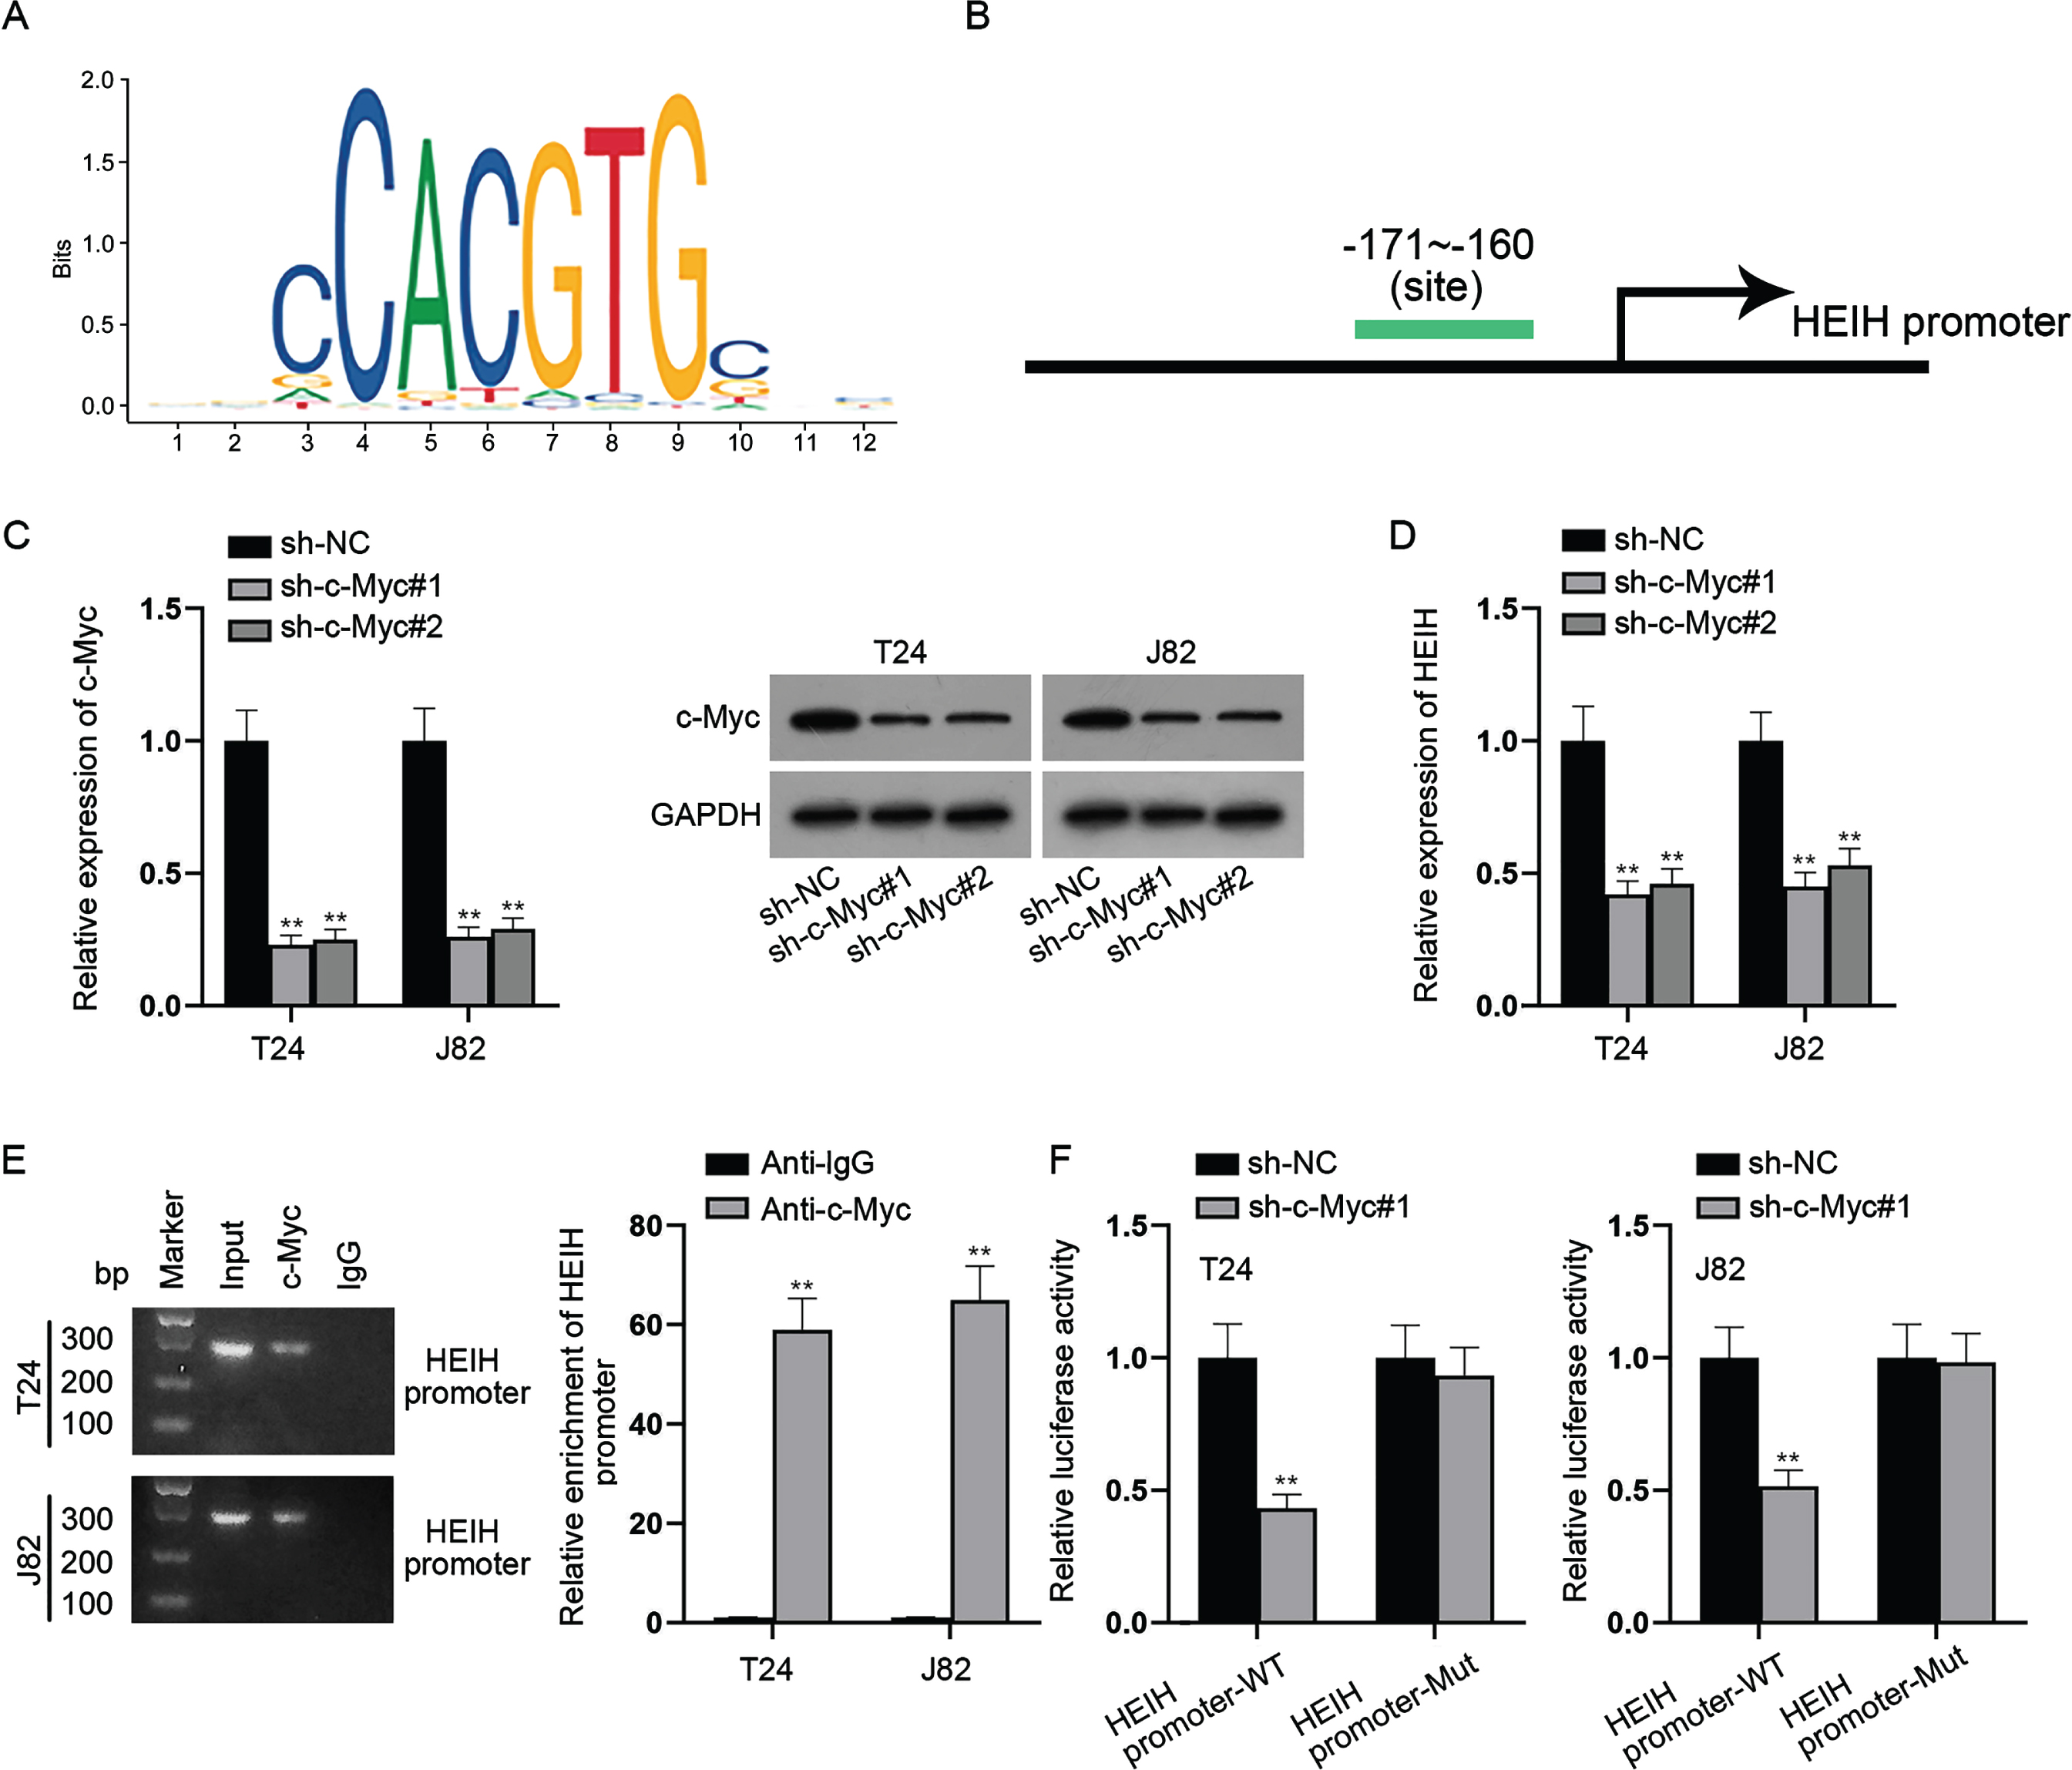 c-Myc transcriptionally activates HEIH expression. (A-B) UCSC and JASPAR databases predicted the c-Myc-binding sites (–171∼–160) in the sequence of HEIH promoter region. (C) Silencing efficiency of c-Myc in BCa cells was validated using RT-qPCR and western blot. (D) HEIH expression in c-Myc-depleted BCa cells was detected by RT-qPCR. (E) Combination between HEIH promoter and c-Myc in BCa cells was examined by ChIP assay. DNA bands were visualized using agarose gel electrophoresis (left panel). Quantification of HEIH promoter by RT-qPCR after ChIP was shown (right panel). (F) Luciferase activity of HEIH promoter-WT and HEIH promoter-Mut was detected in BCa cells after c-Myc deficiency. **P < 0.01.